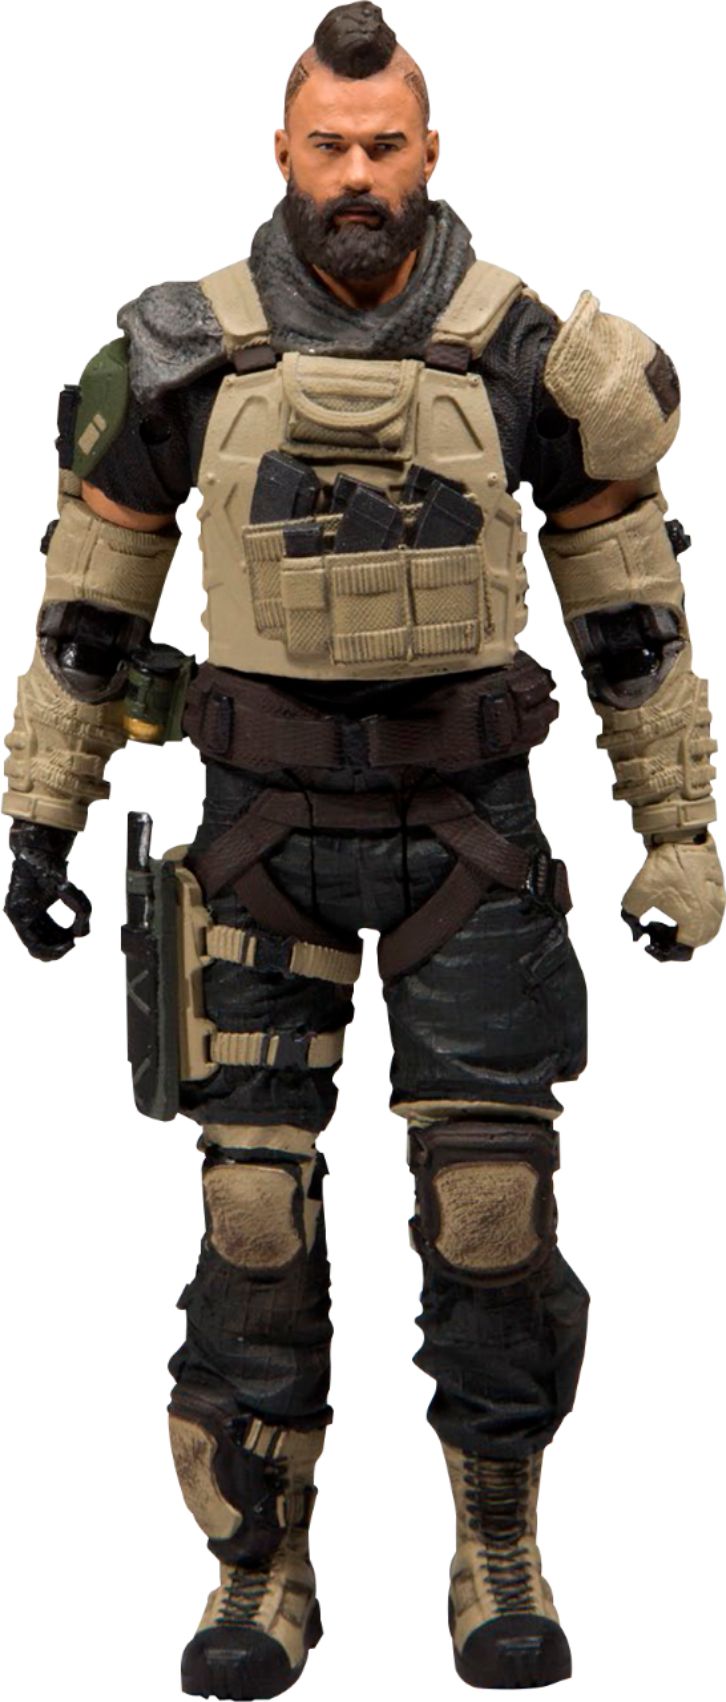 Call of Duty - Action Figure - Styles May Vary